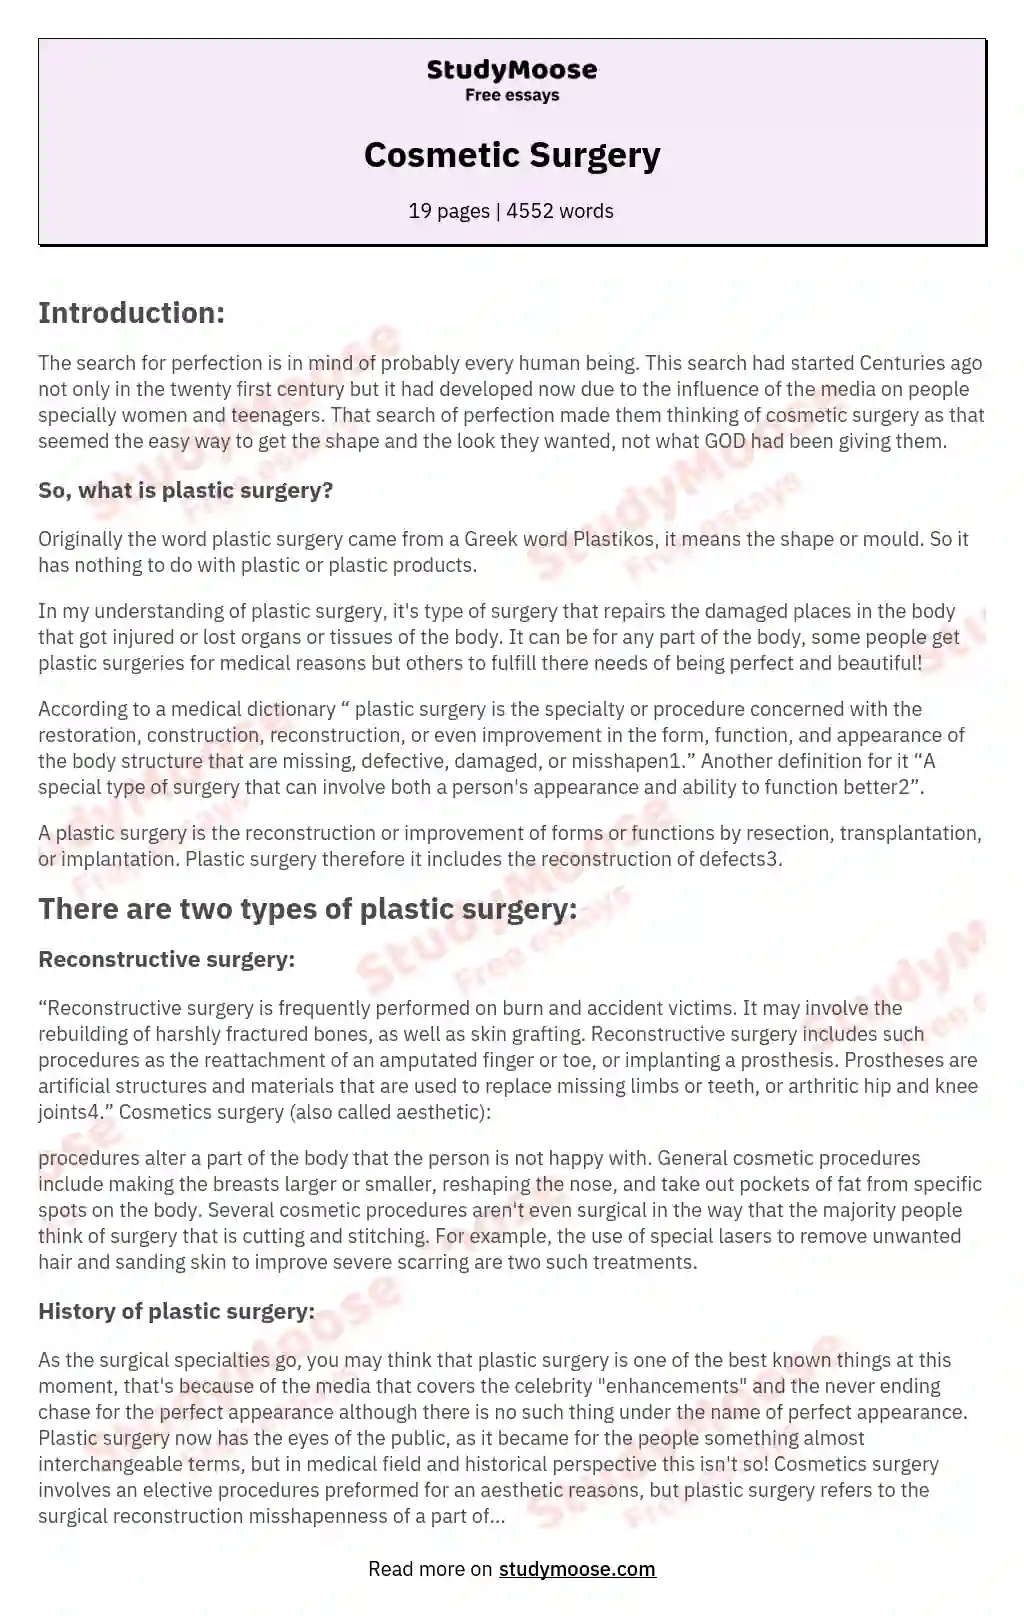 Cosmetic Surgery essay